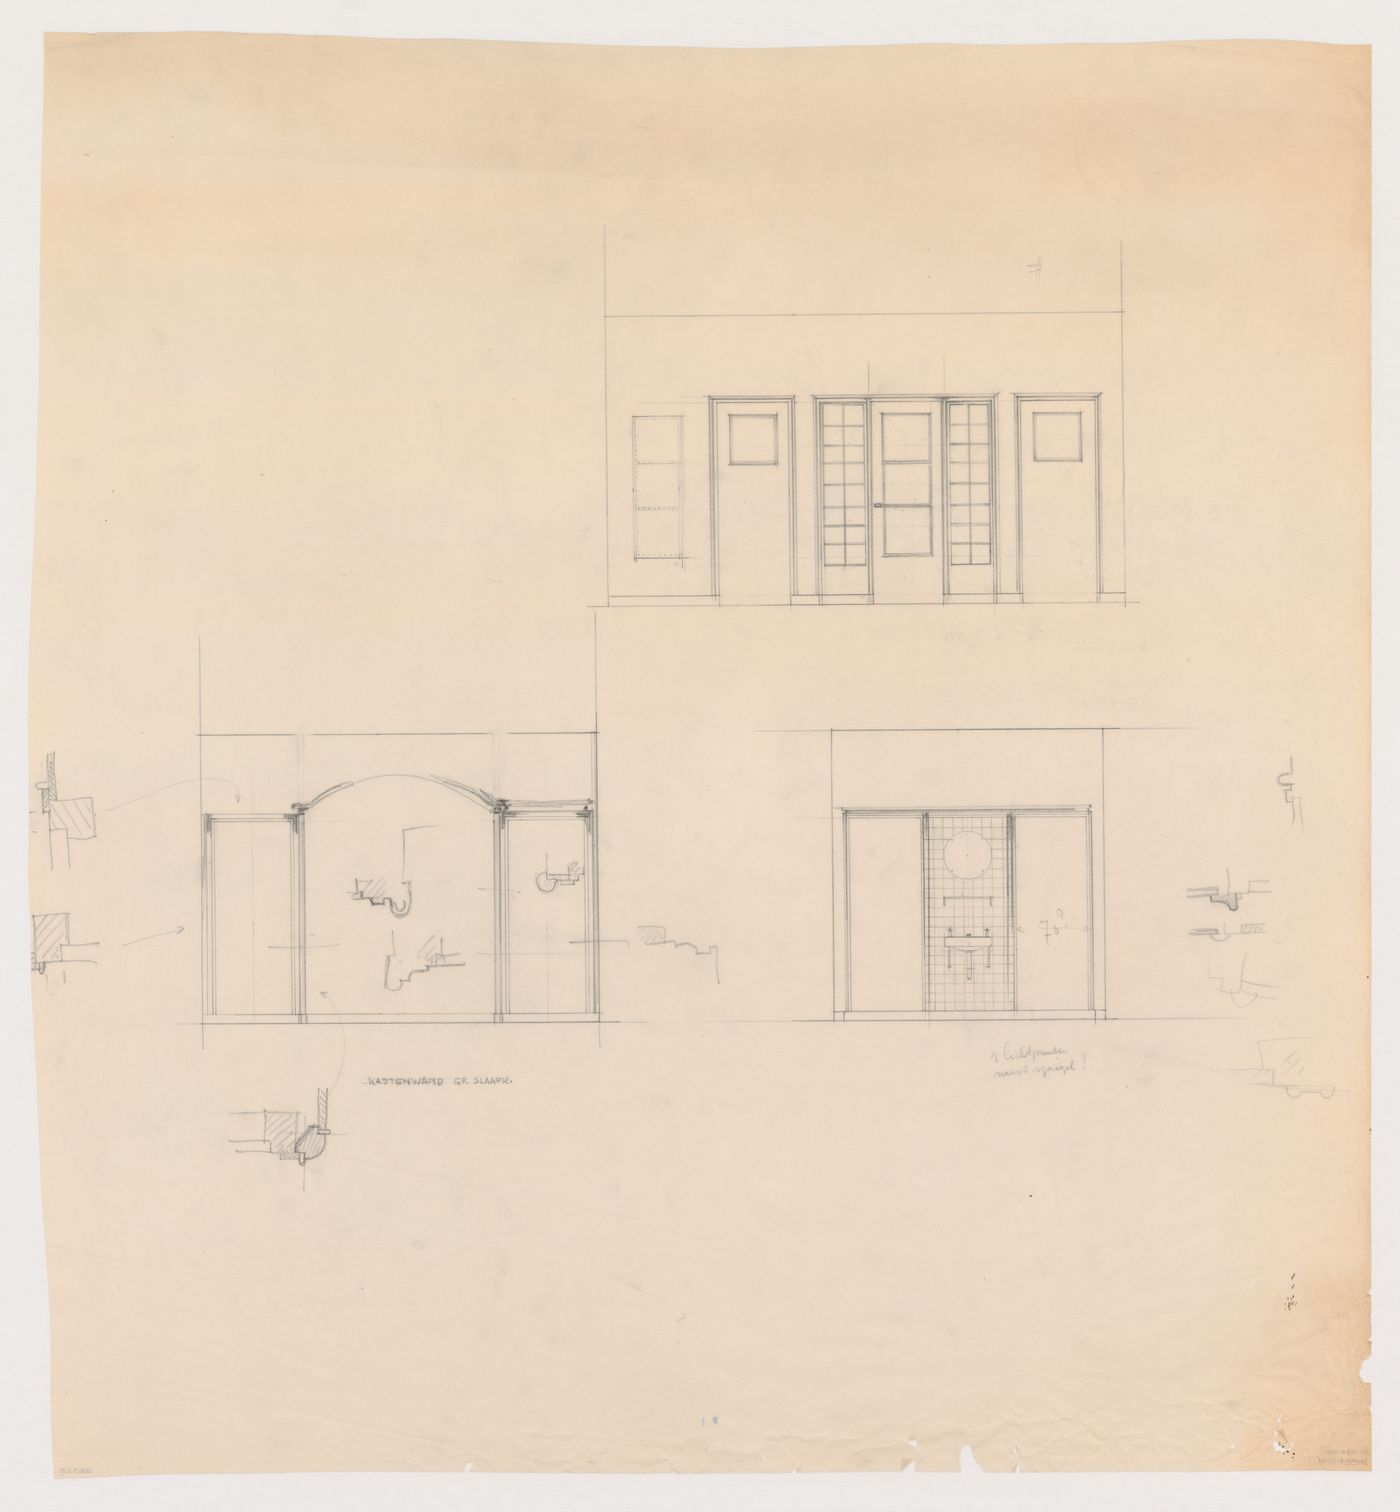 Elevations and sectional details for a wall cabinet, lavatory sink and interior doorway for Olveh mixed-use development, Rotterdam, Netherlands